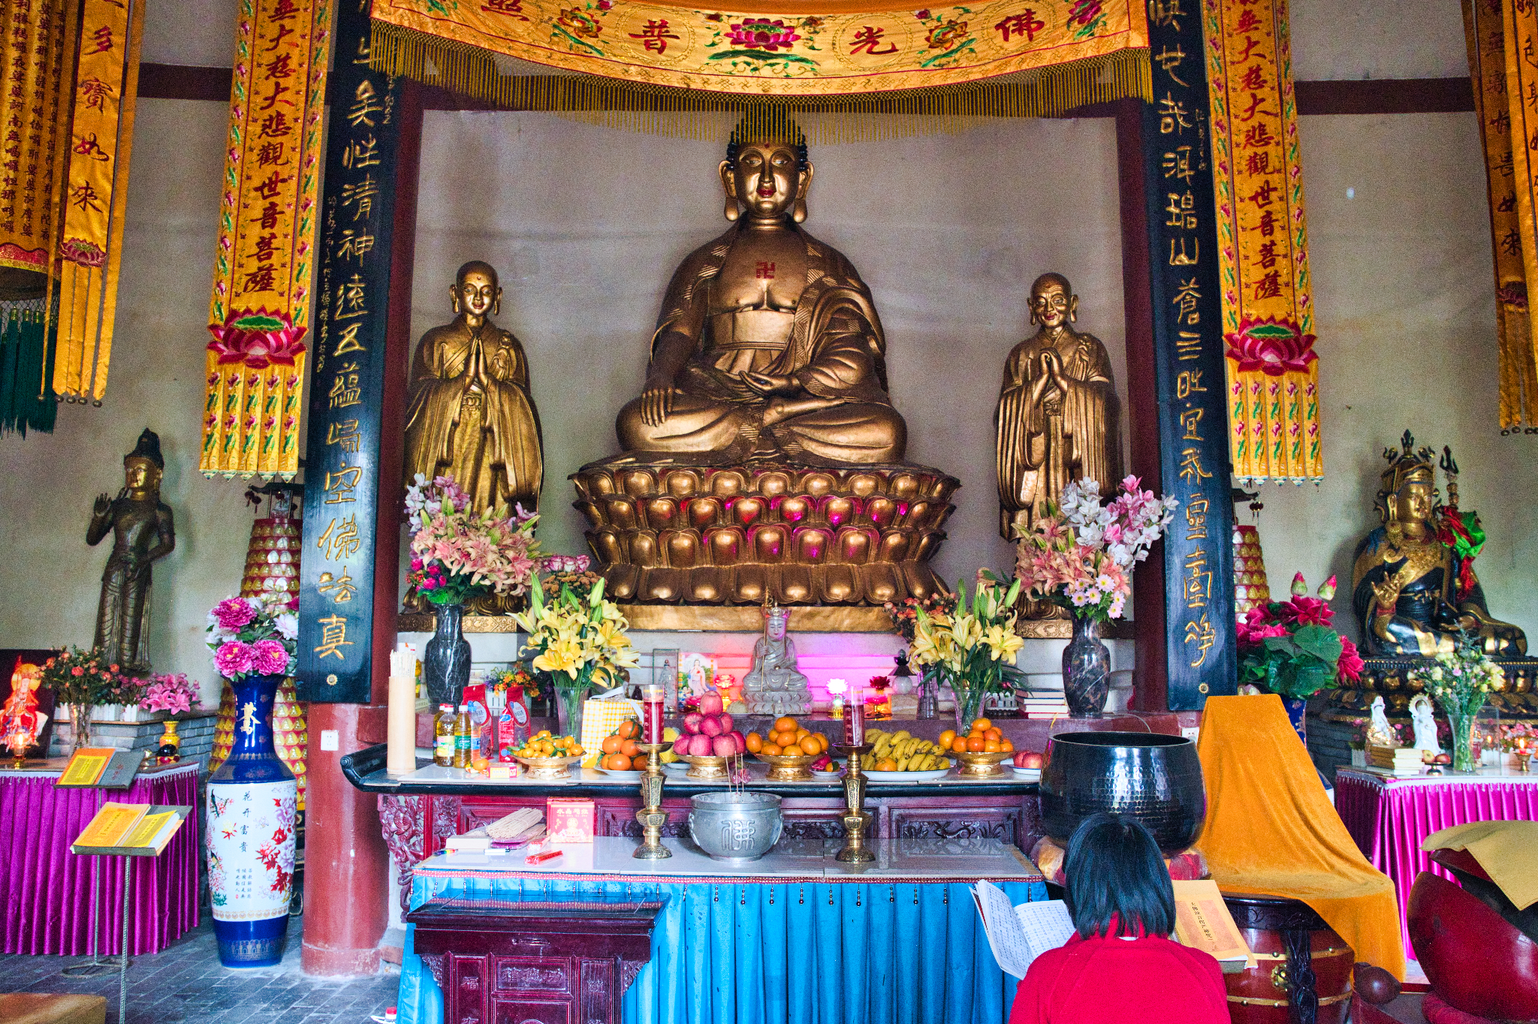 Picture: Buddhist temple near Fengyangyi 凤阳邑.